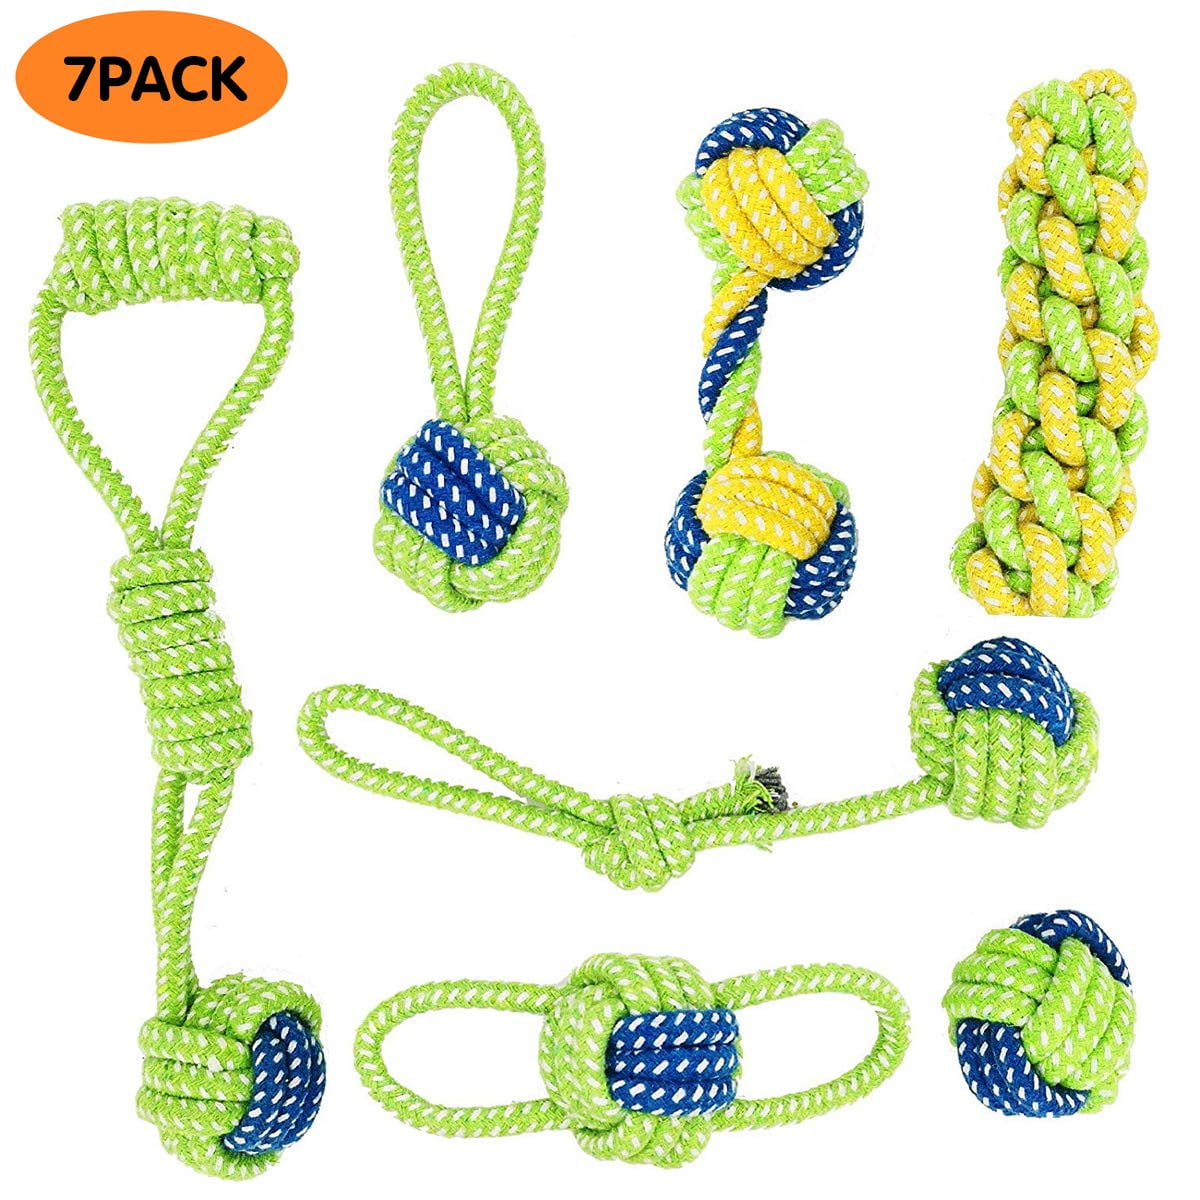 Dog Chew Toys Tough Rope Chew Toys Great for Dog Training,Indestructible Rope Toy for Dog Teeth Cleaning YUEJING Durable Rope Dog Toys for Aggressive Chewers 